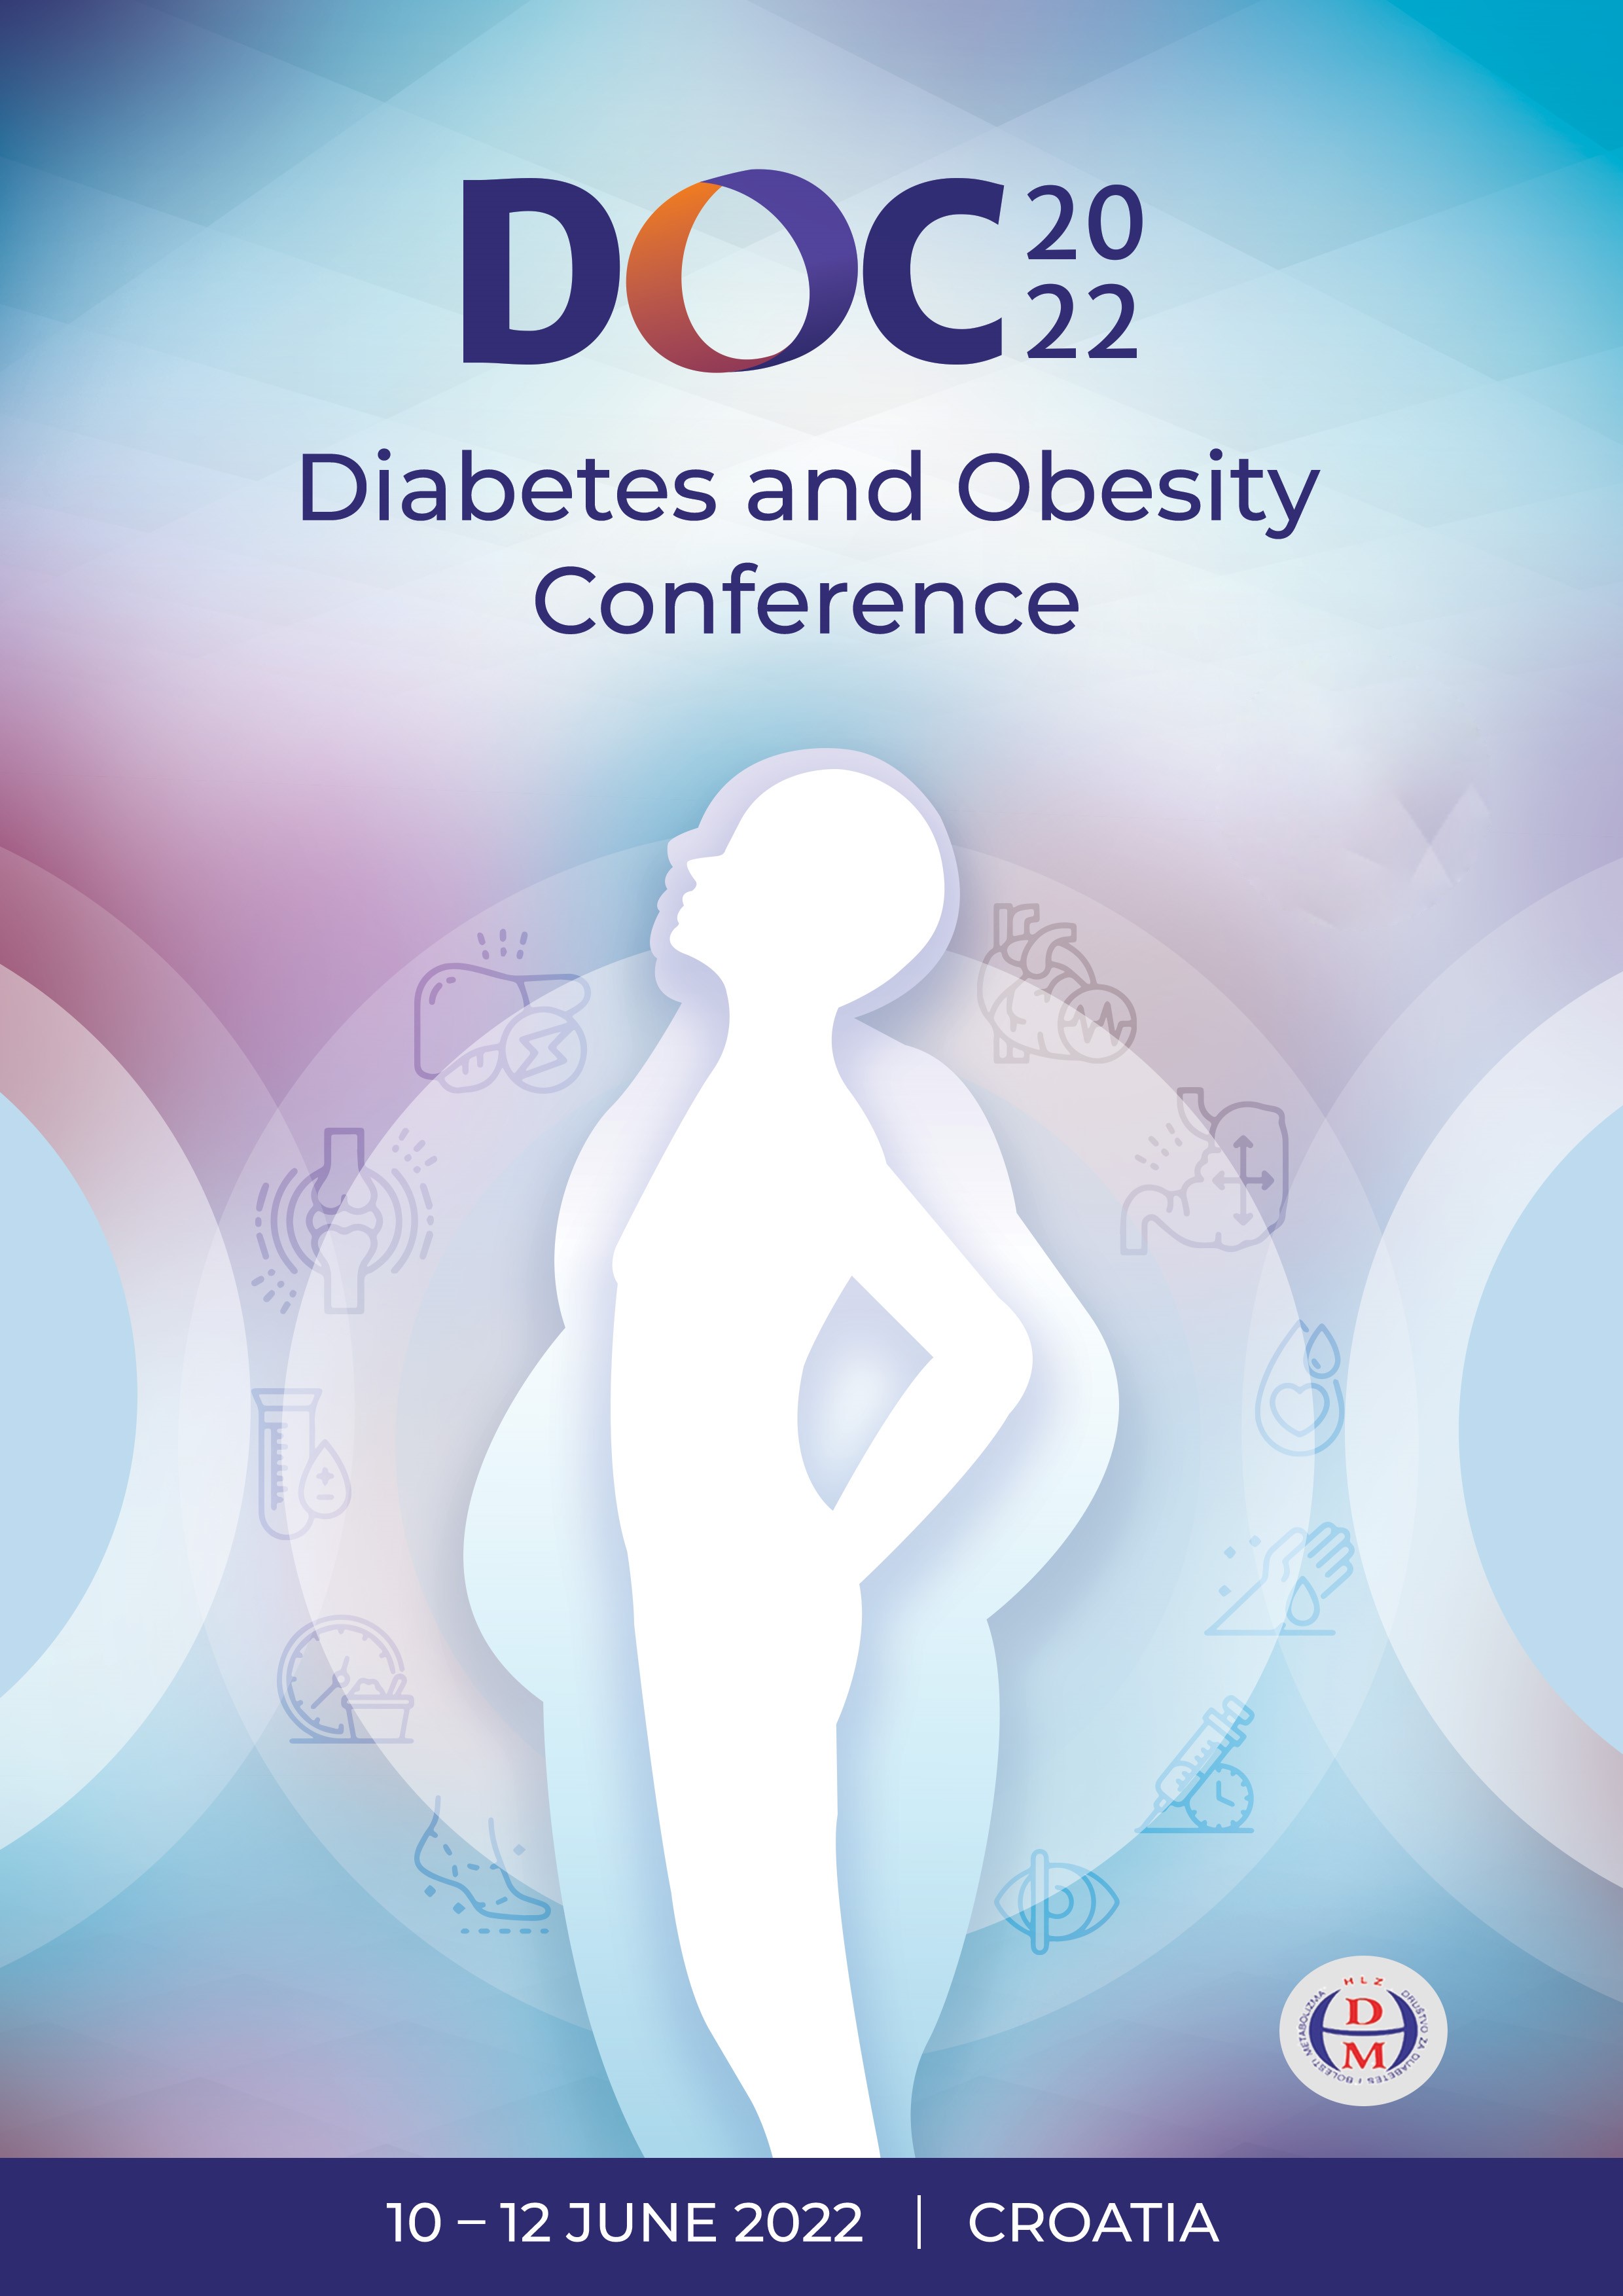 Diabetes and Obesity Conference DOC 2022, Zagreb 10.-12.6.2022.